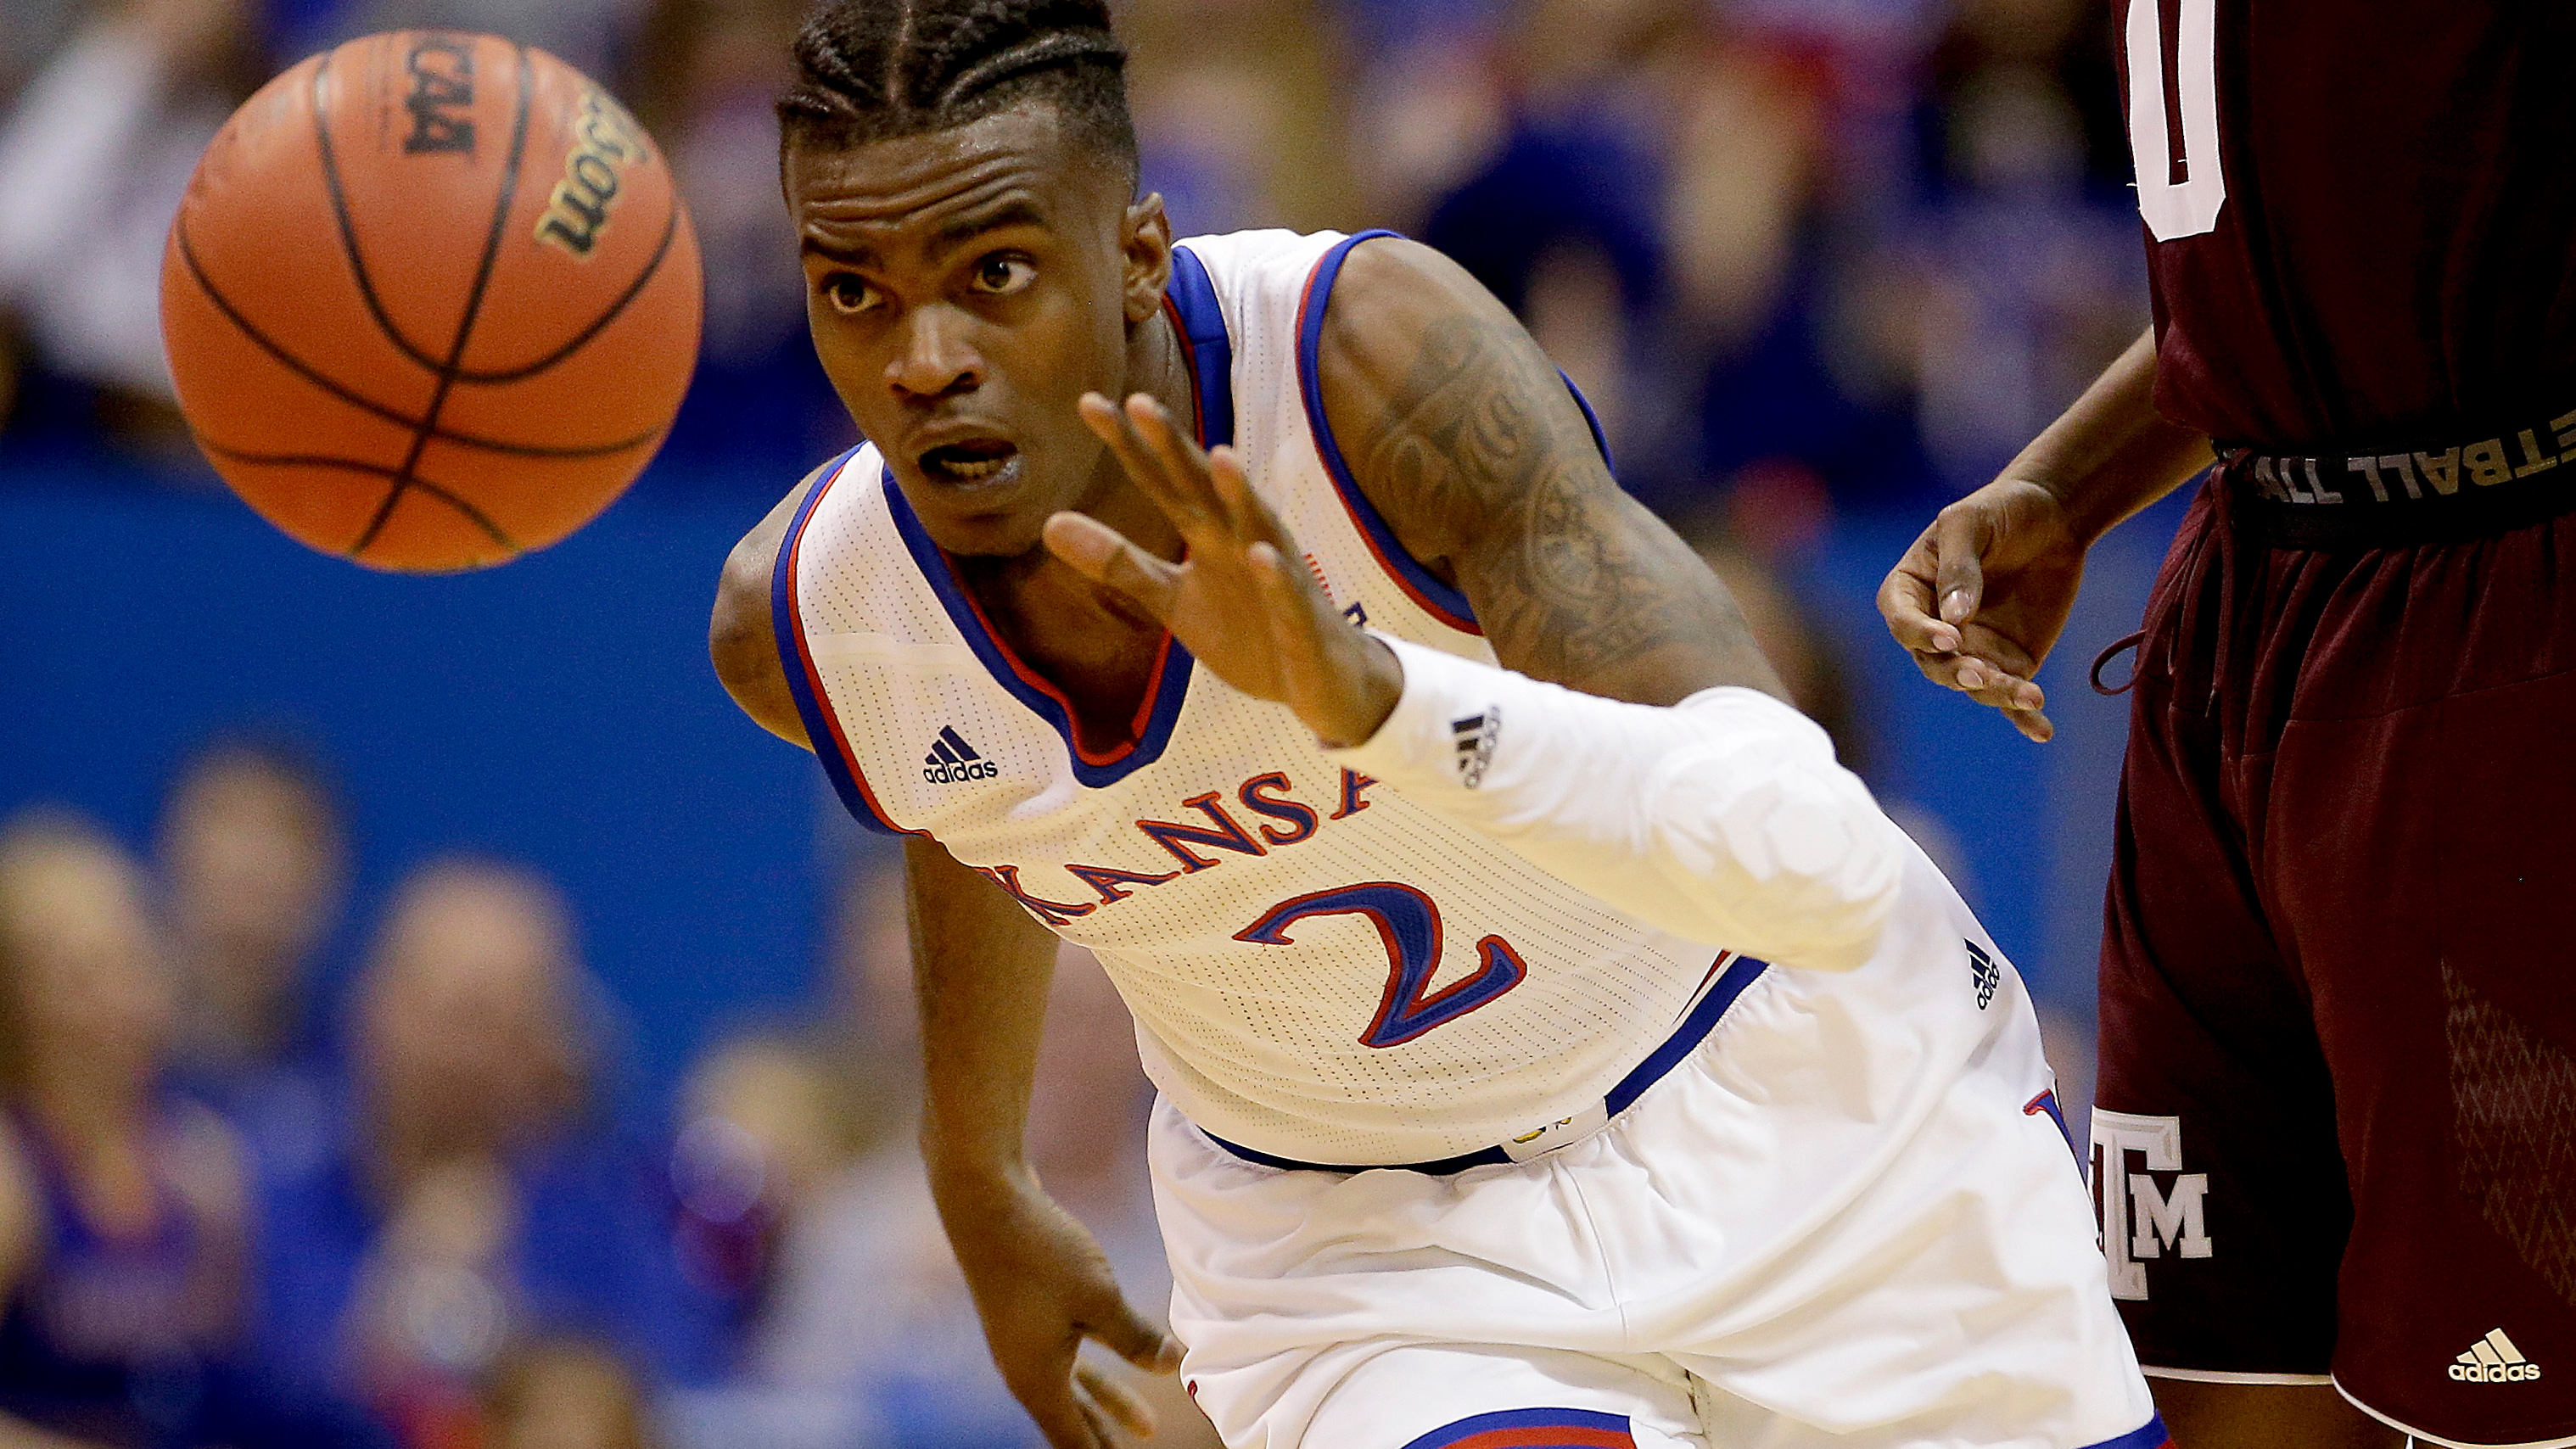 Self: 'Not much margin for error' for Jayhawks as TCU visits